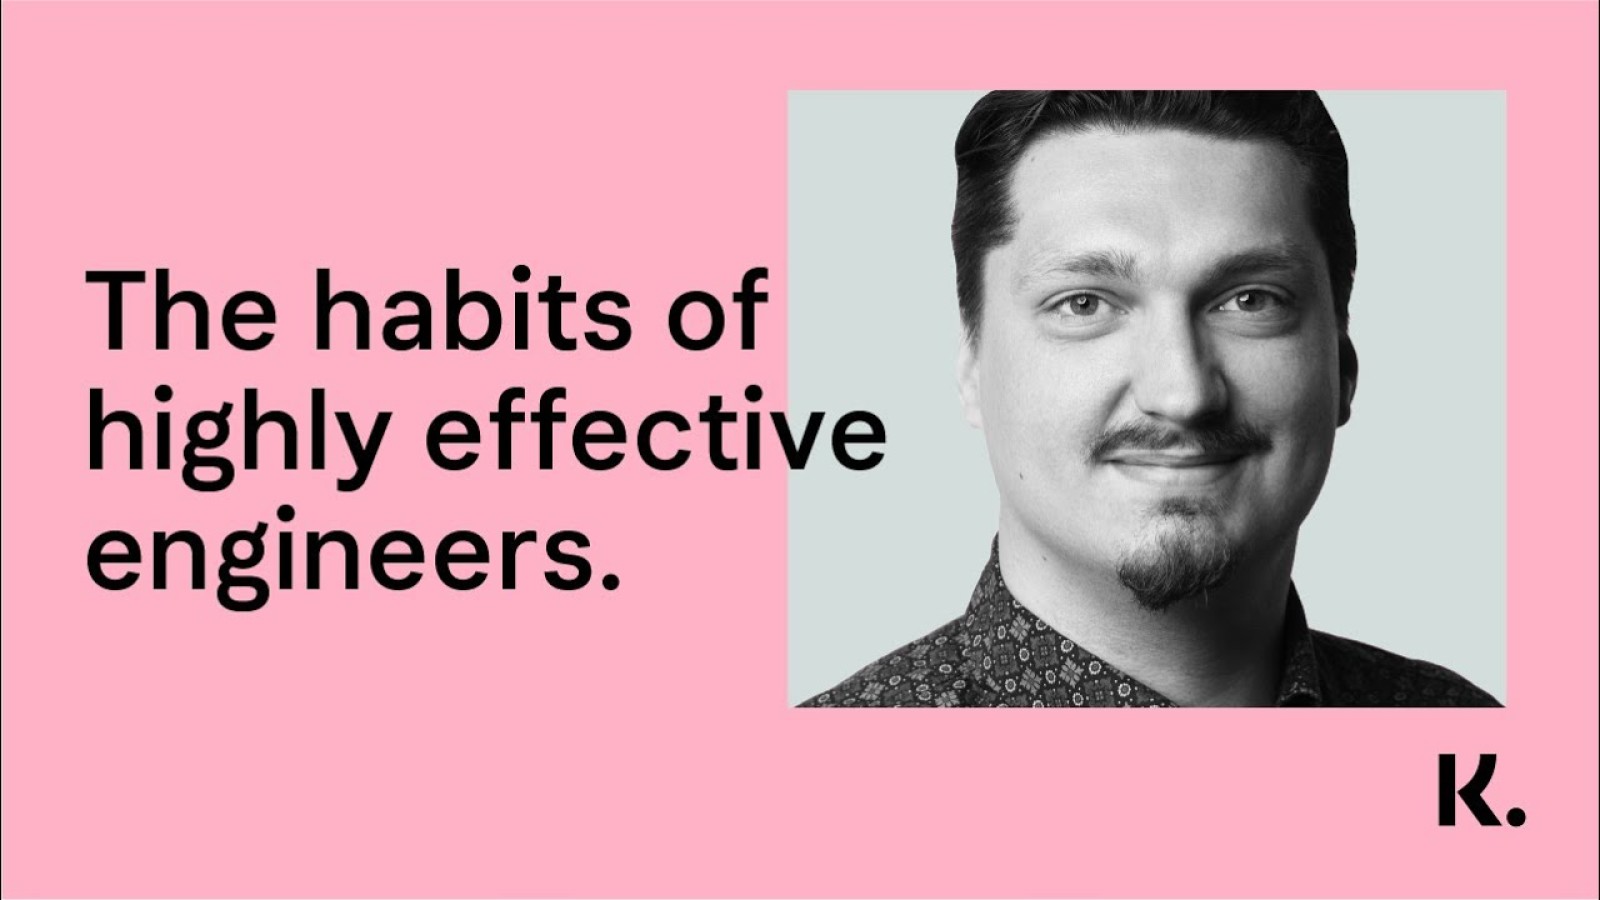 The Habits of Highly Effective Engineers